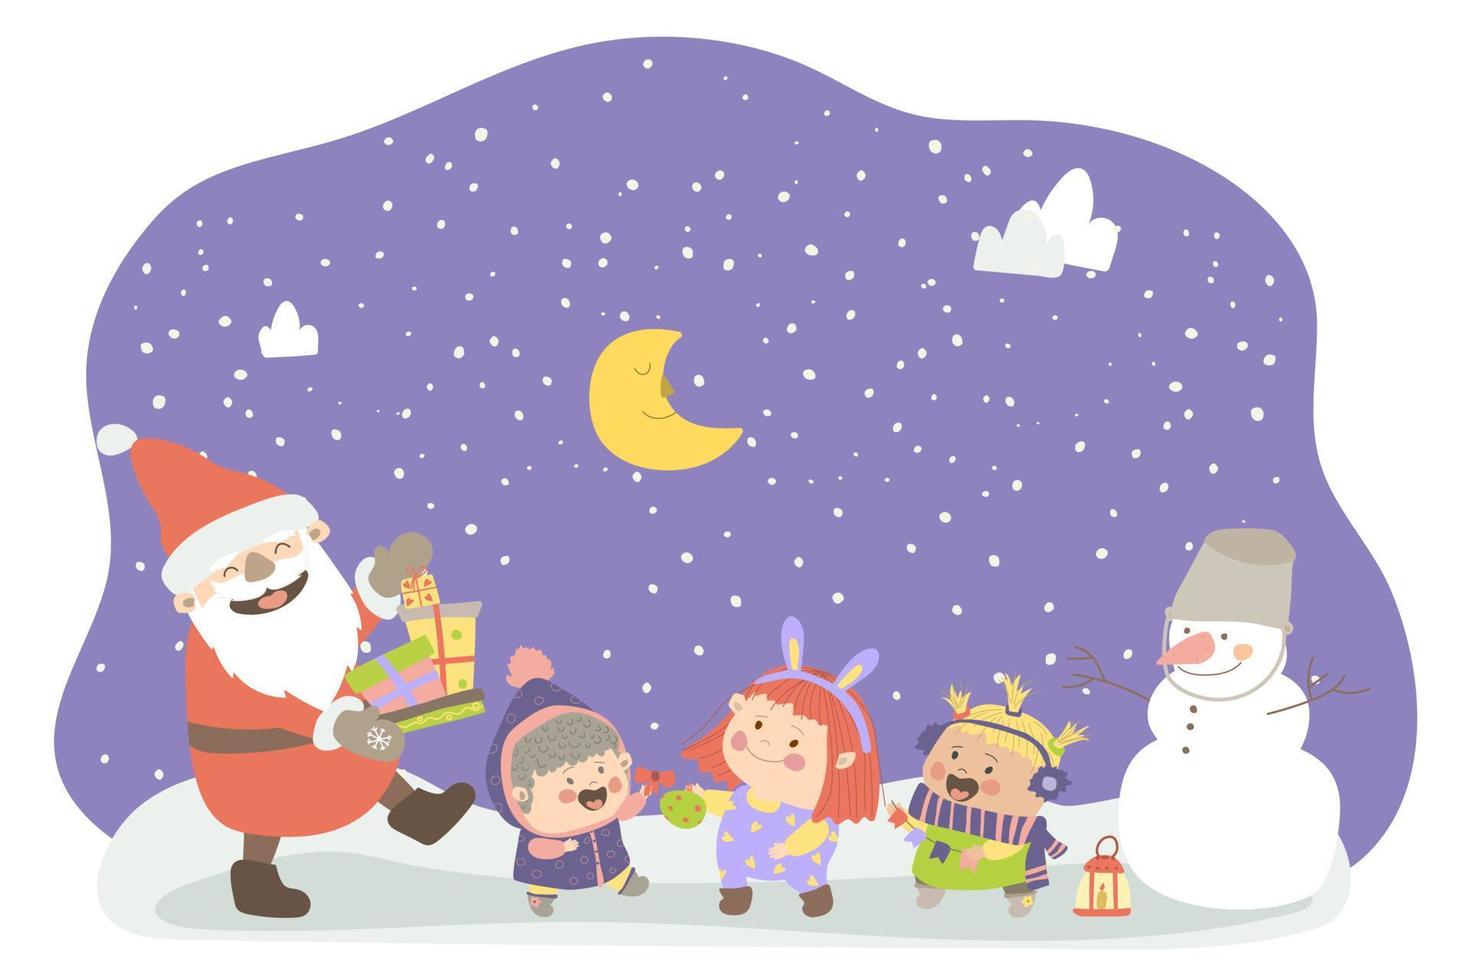 Santa Claus carries presents. Cheerful girls and a snowman singing Christmas songs. Vector illustration in cartoon style. Hand drawing. Isolate. For print, web design.